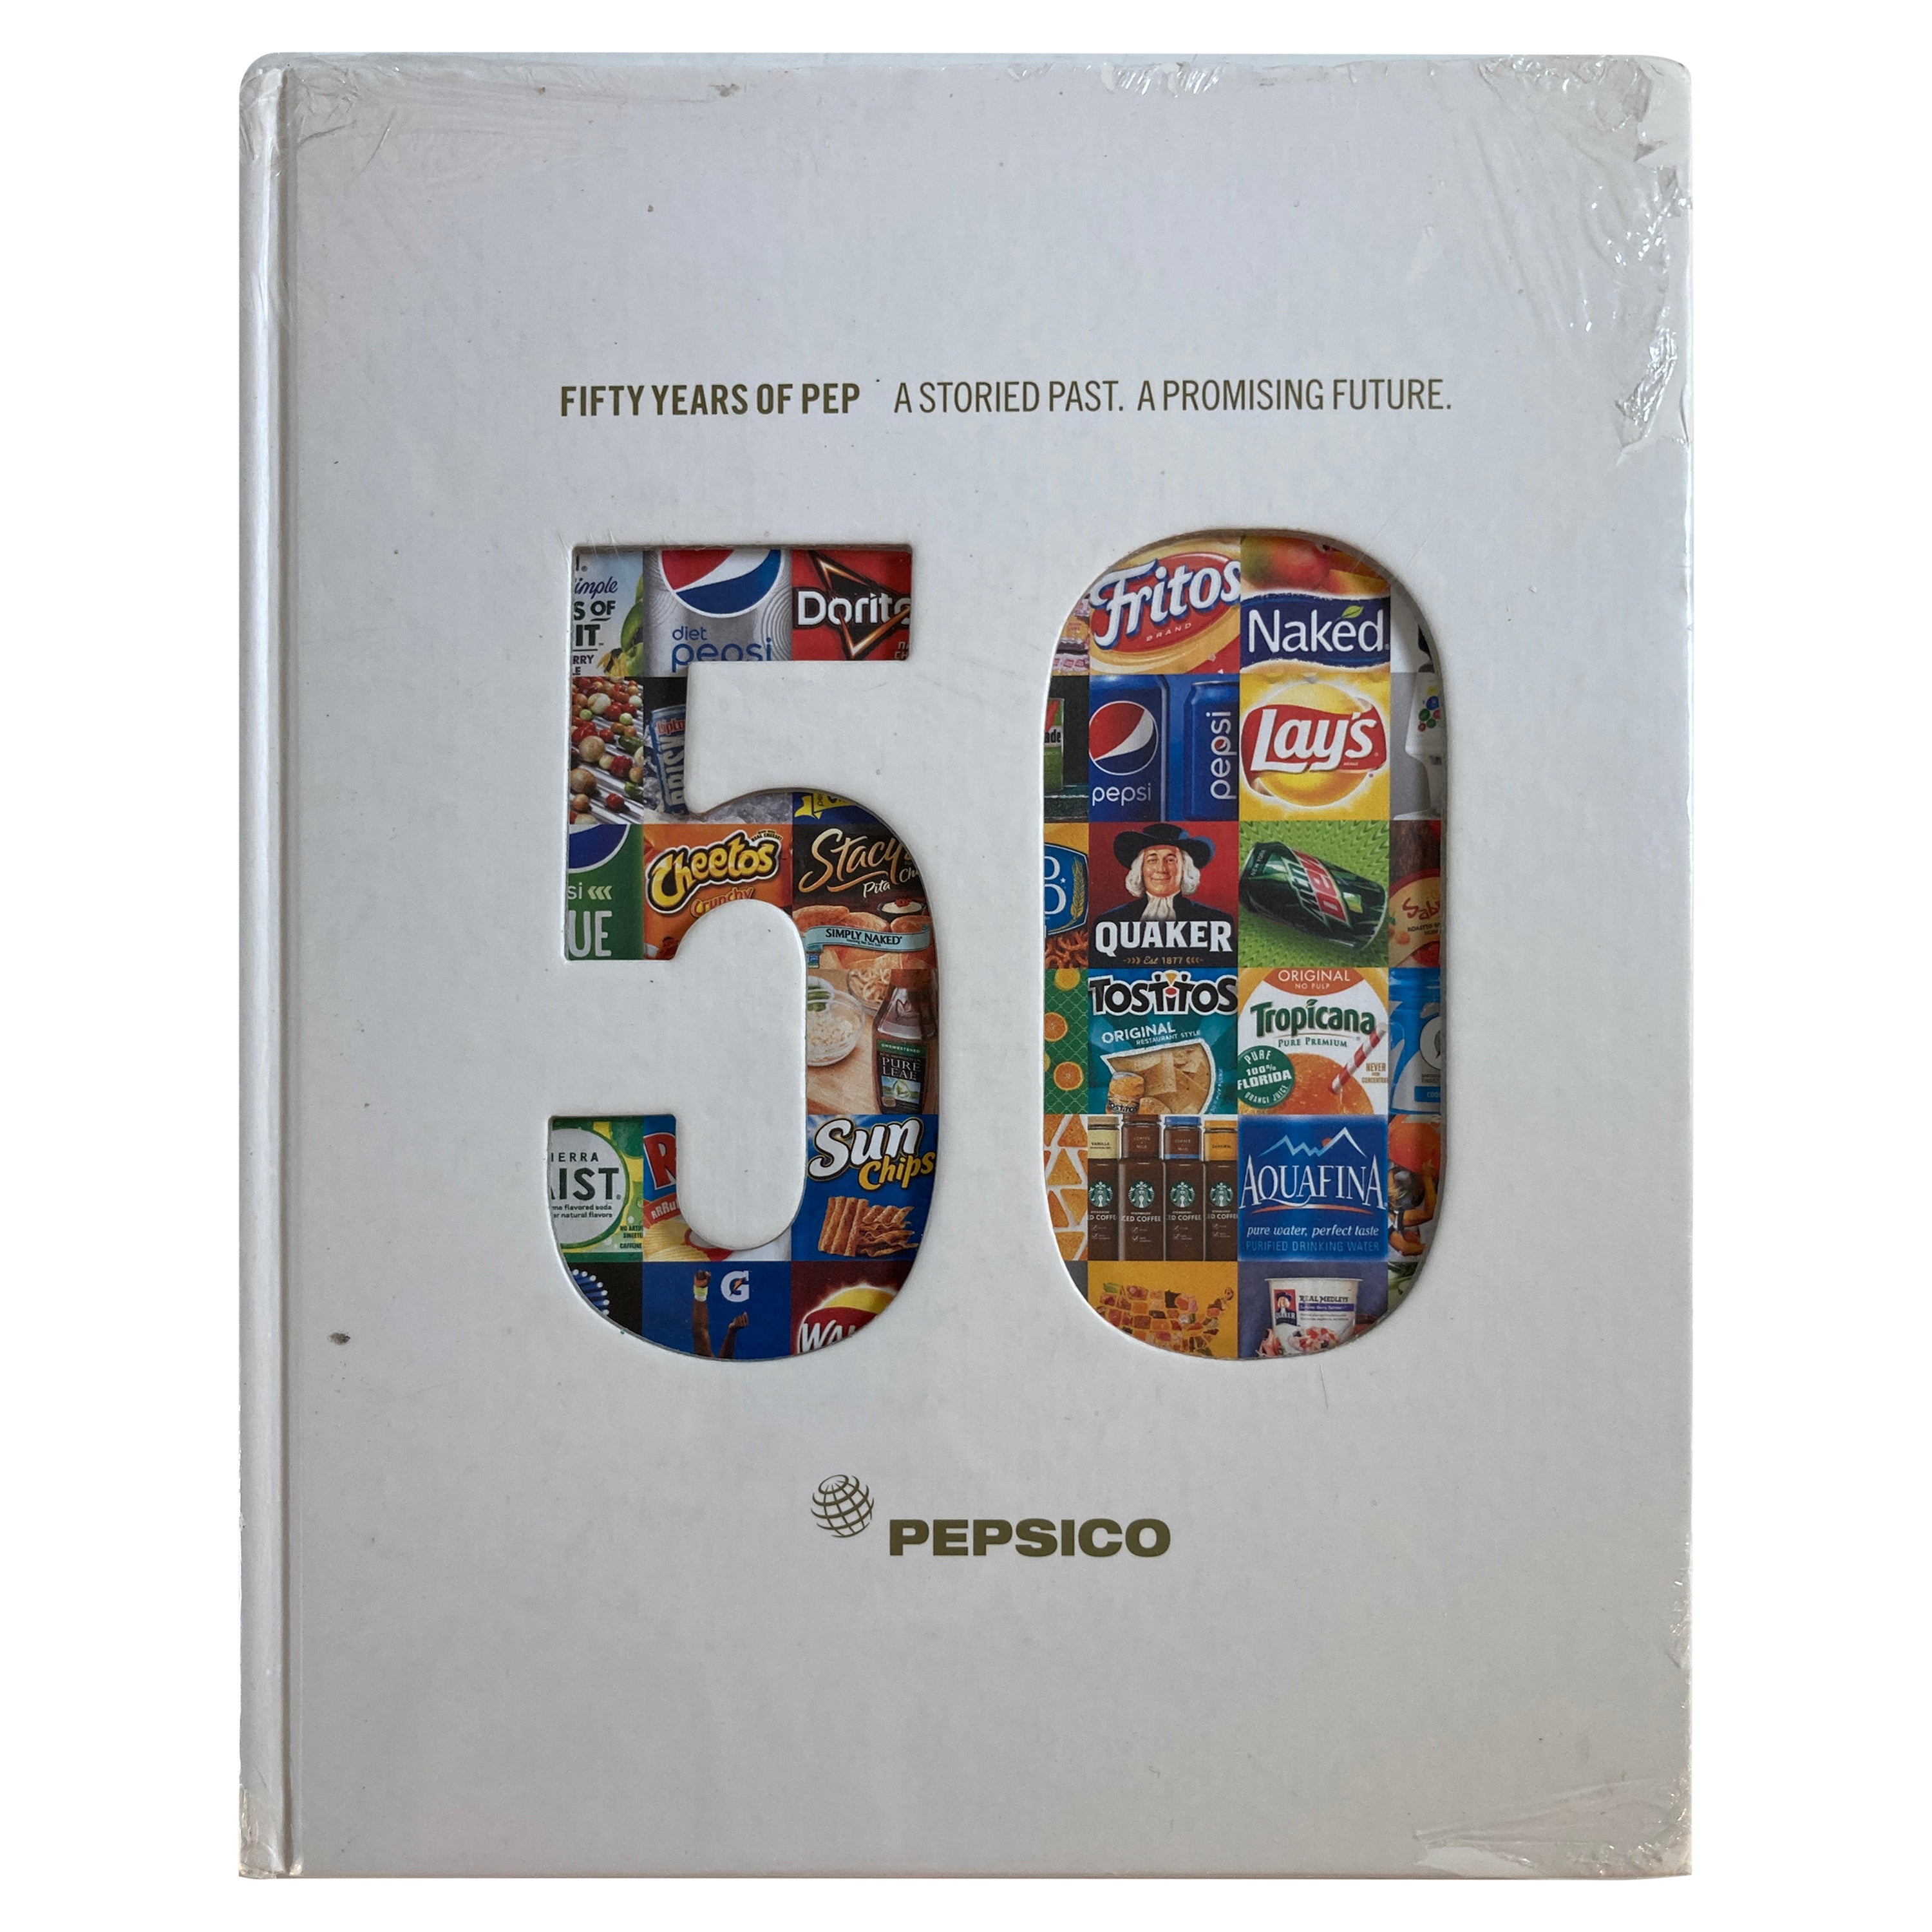 Fifty Years of Pep A Storied Past, A Promising Future, livre à couverture rigide